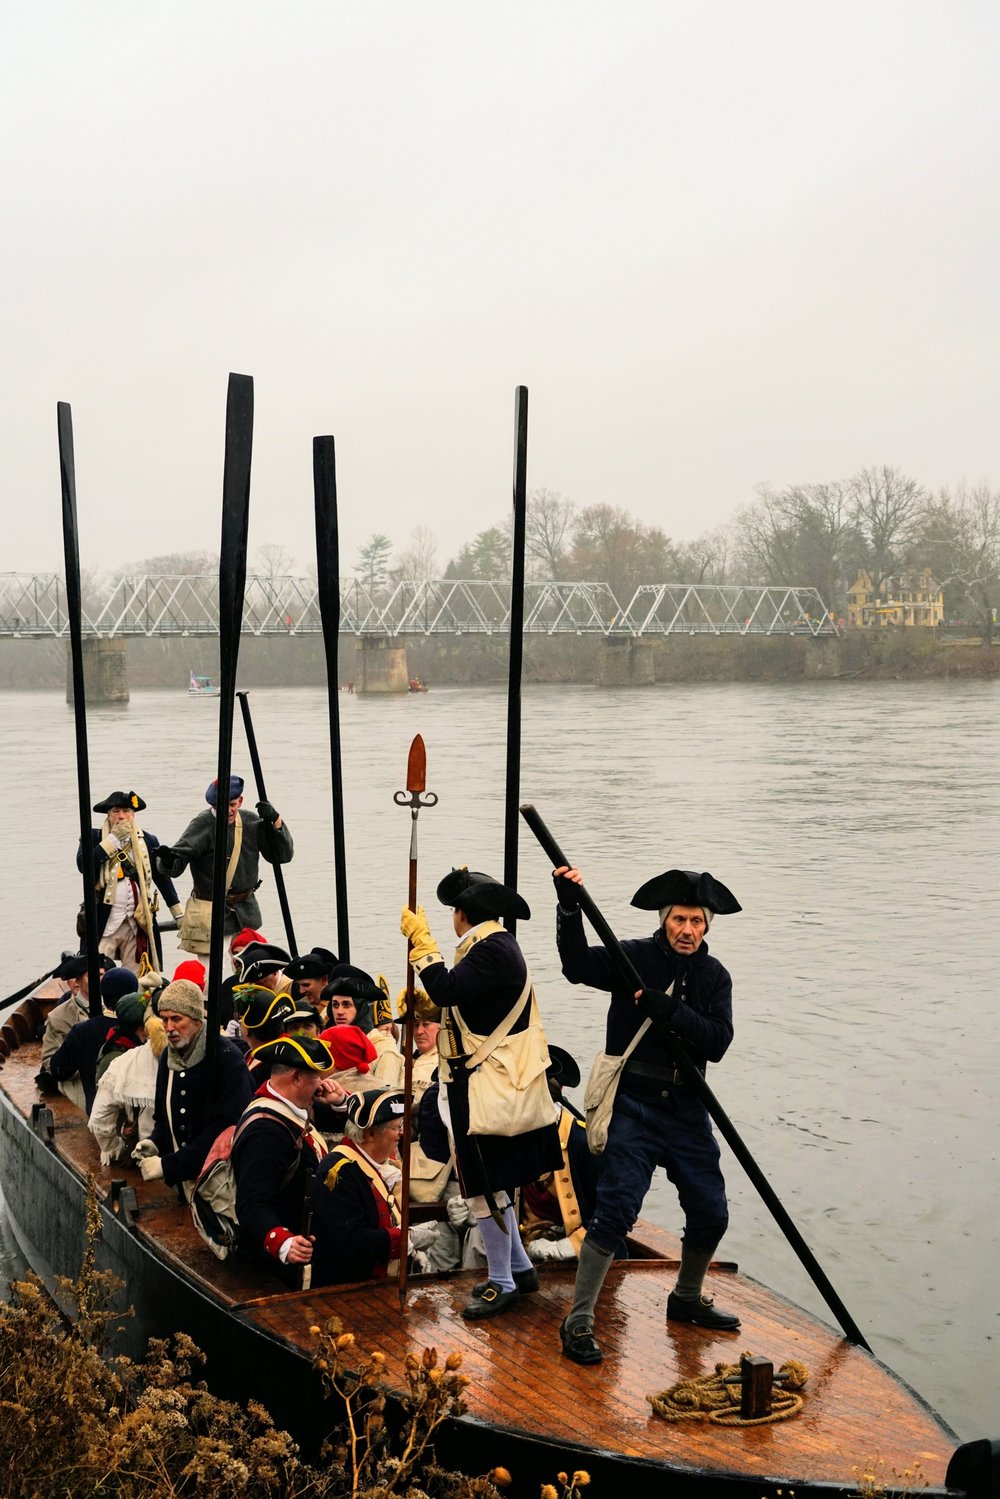 One of three Durham boats that navigated the Delaware in the rehearsal for the annual Christmas Crossing that took place Dec. 11 battled a strong current as it reached the New Jersey shore. A crowd of well-wishers greeted the reenactors after they crossed from Pennsylvania. The annual event recalls the historic crossing of the river on Christmas 1776 by George Washington and his troops, who turned the tide of the American Revolution. 